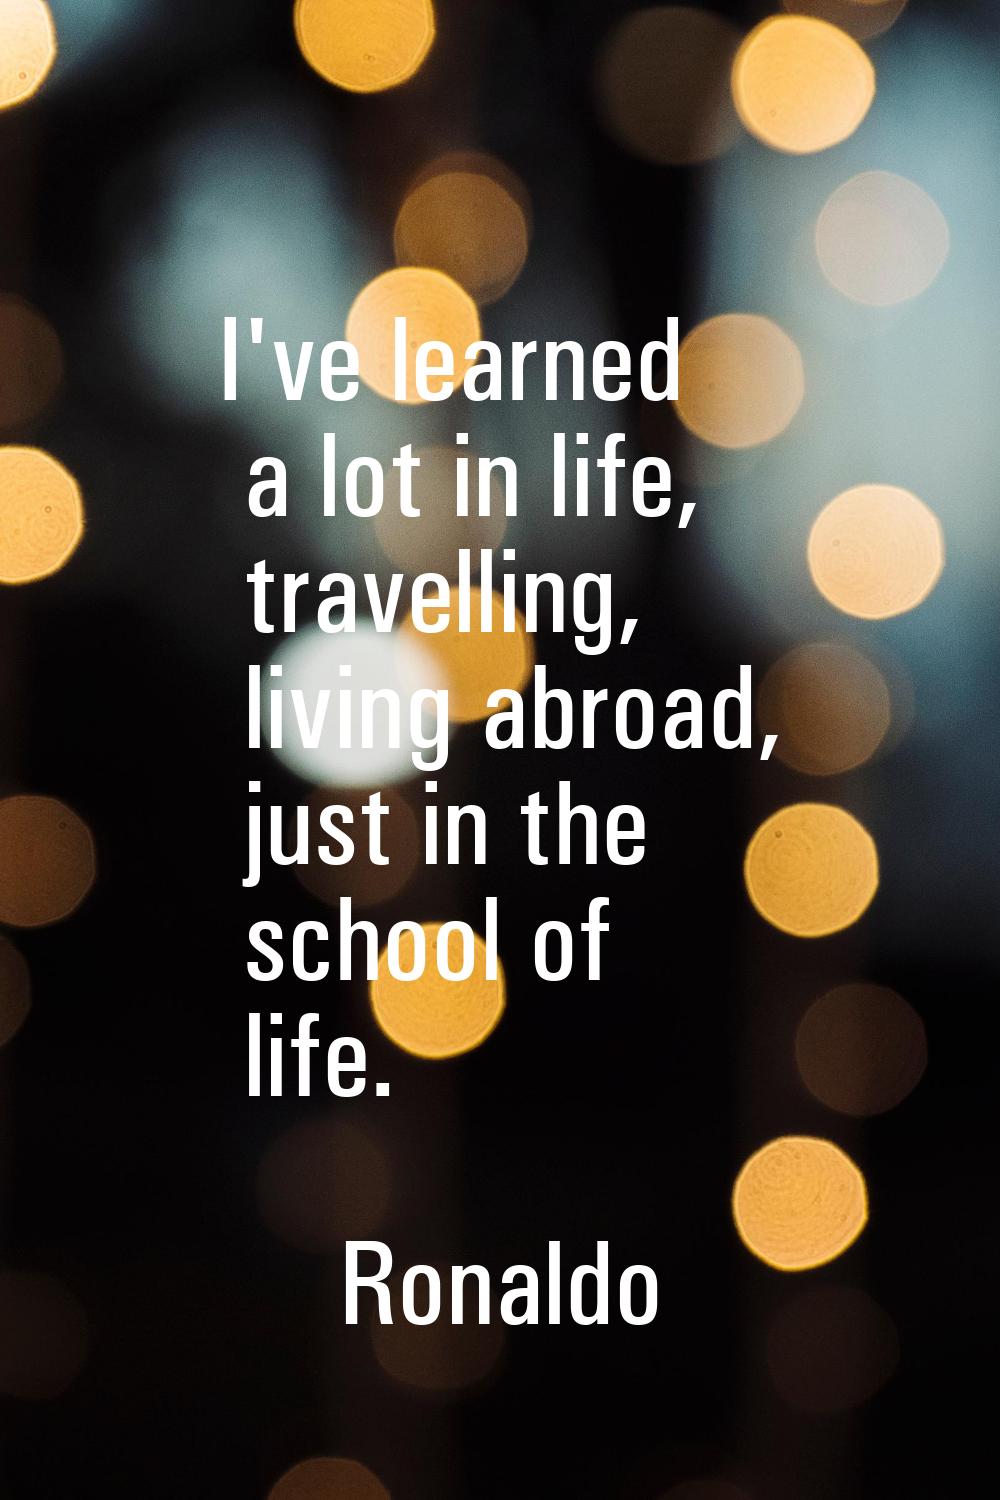 I've learned a lot in life, travelling, living abroad, just in the school of life.